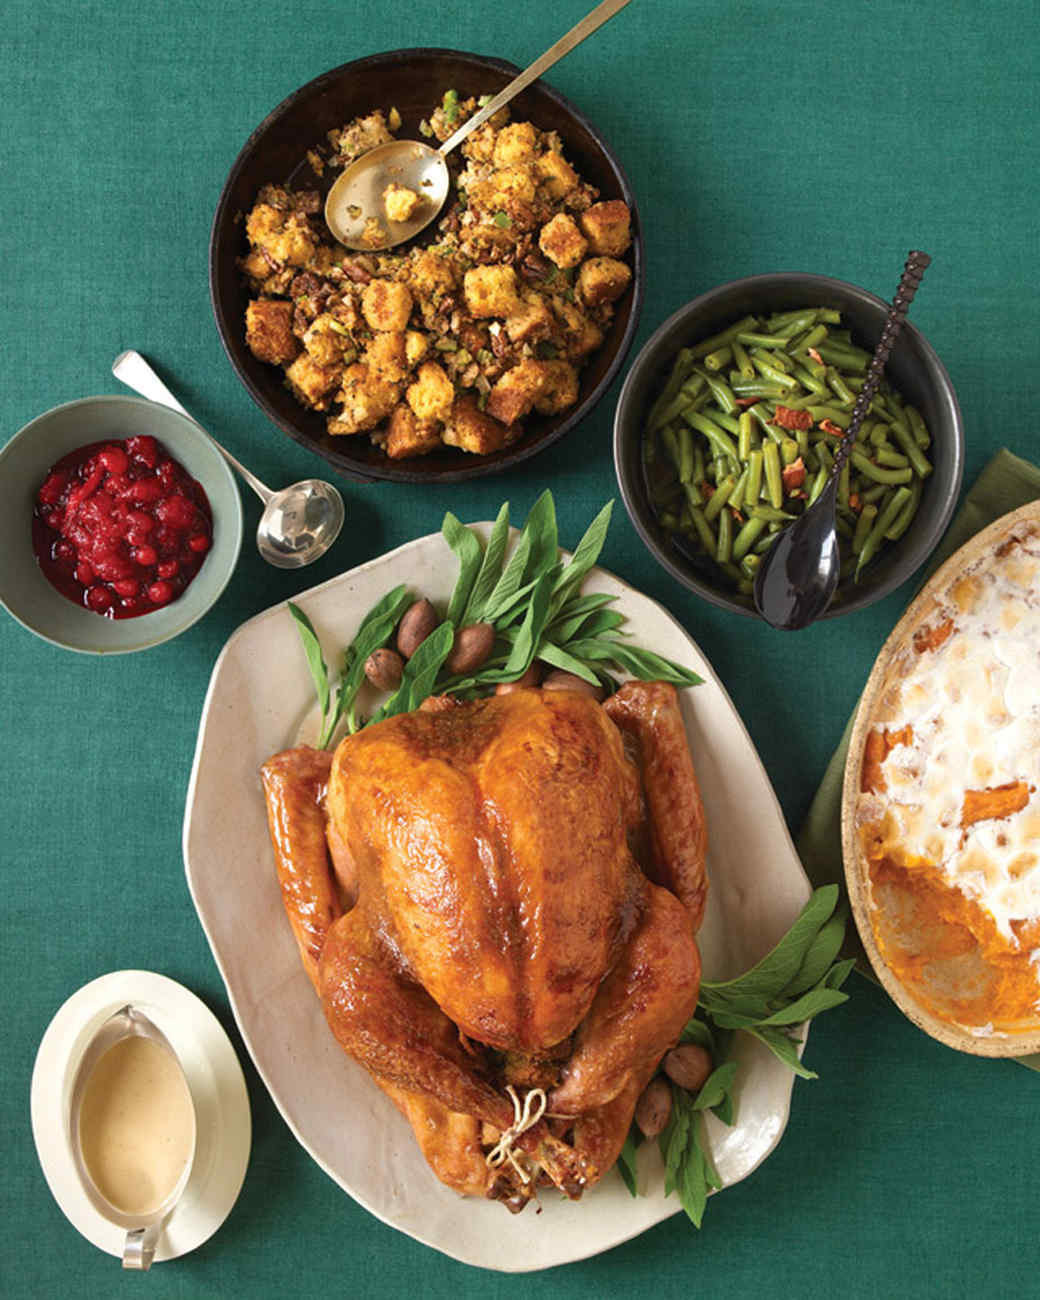 Best 30 Mimi's Cafe Thanksgiving Dinner Most Popular Ideas of All Time